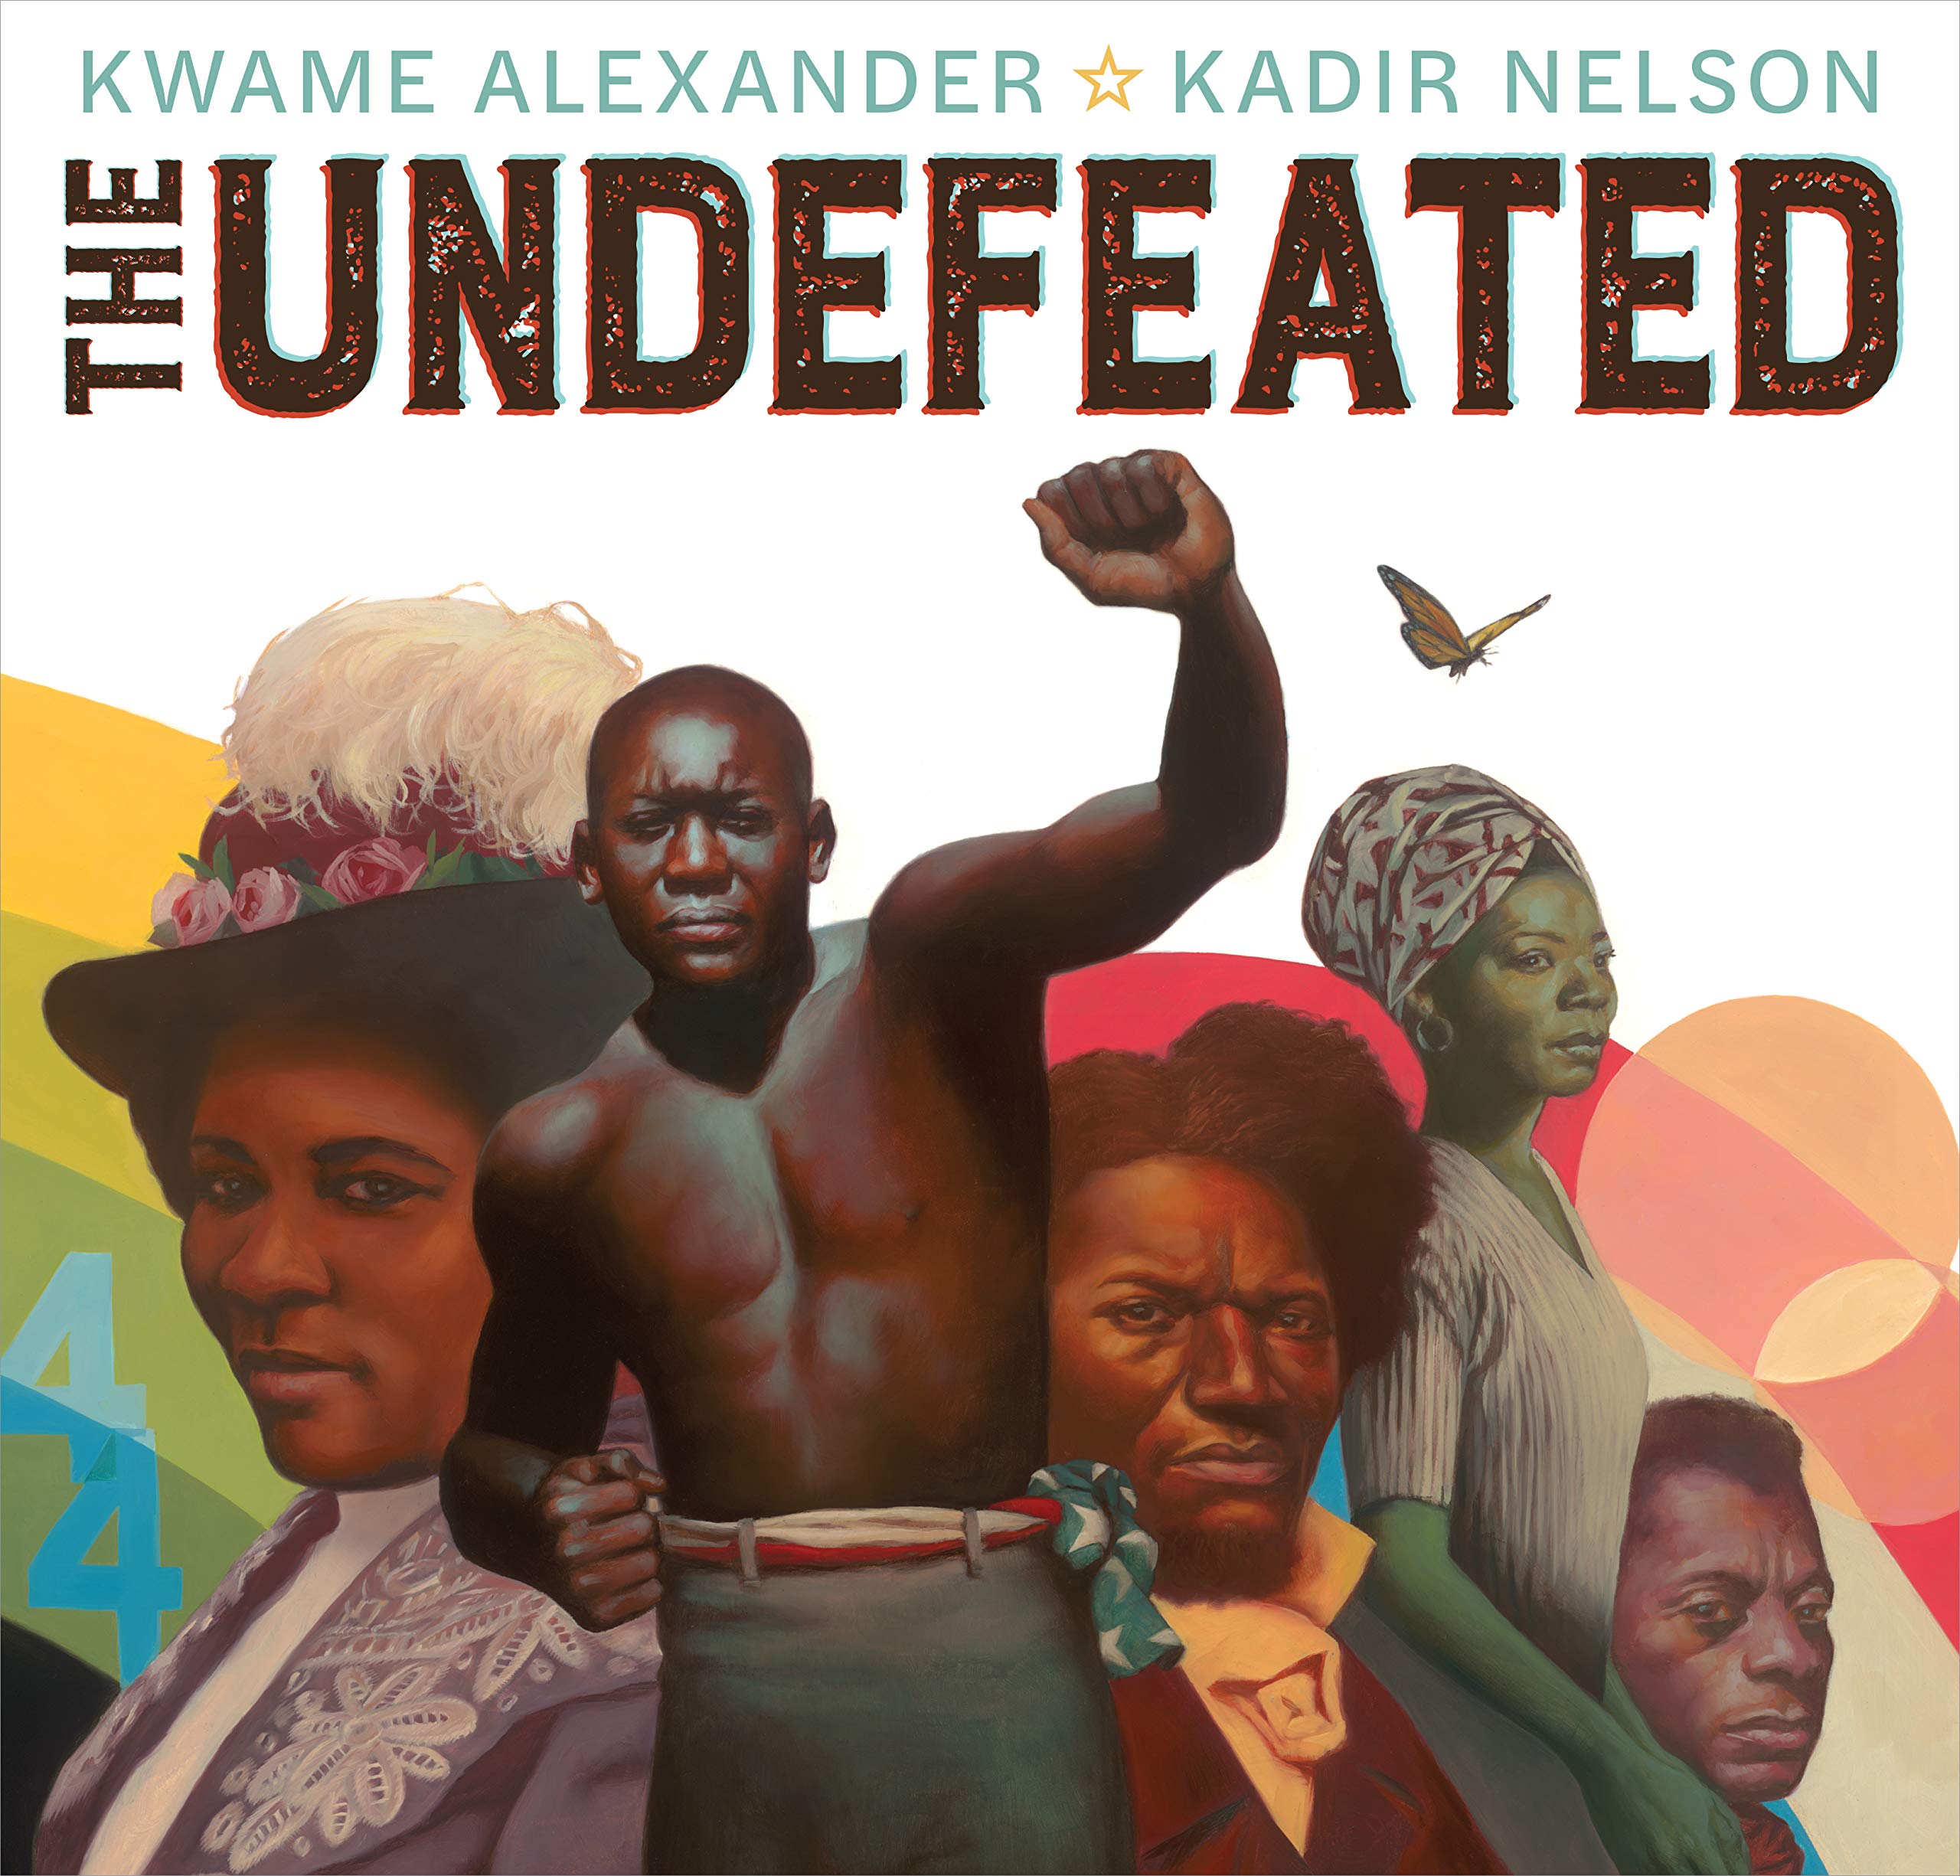 The Undefeated by Kwame Alexander and Kadir Nelson